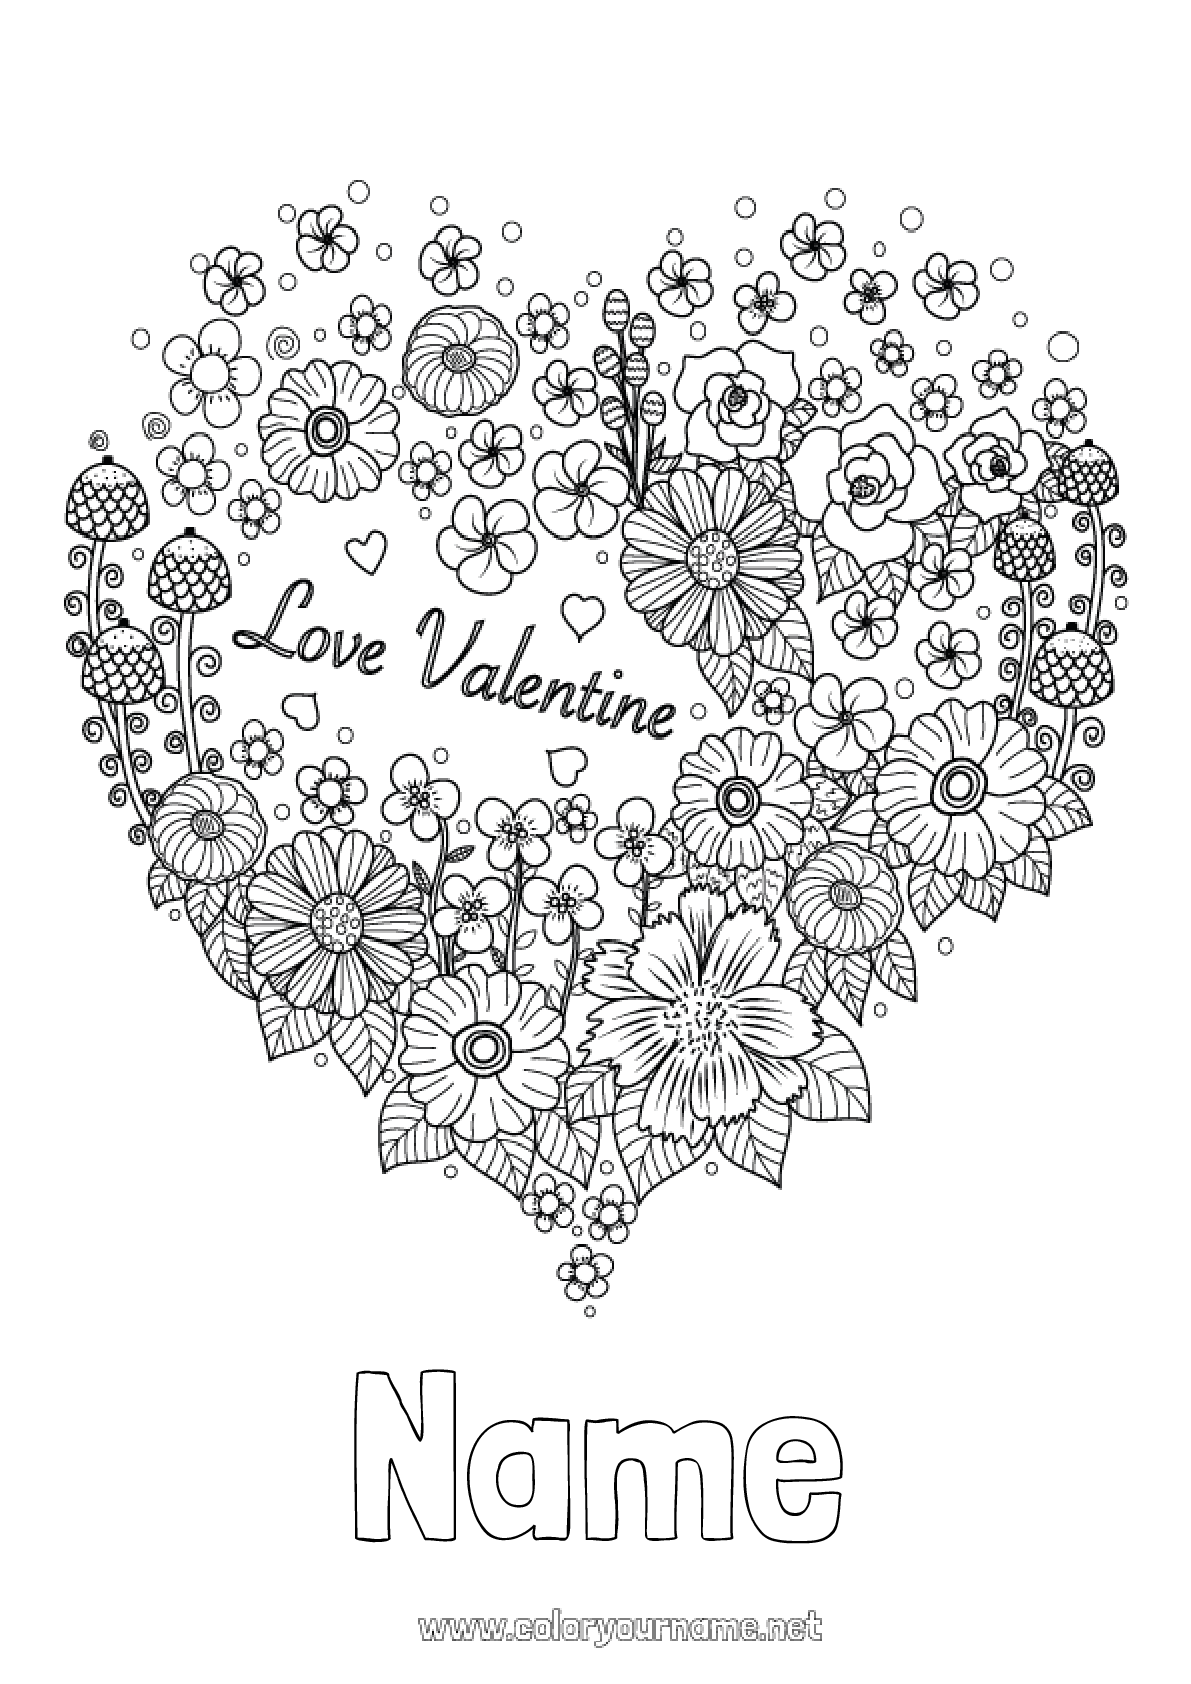 Coloring page No.791 - Flowers Heart I love you